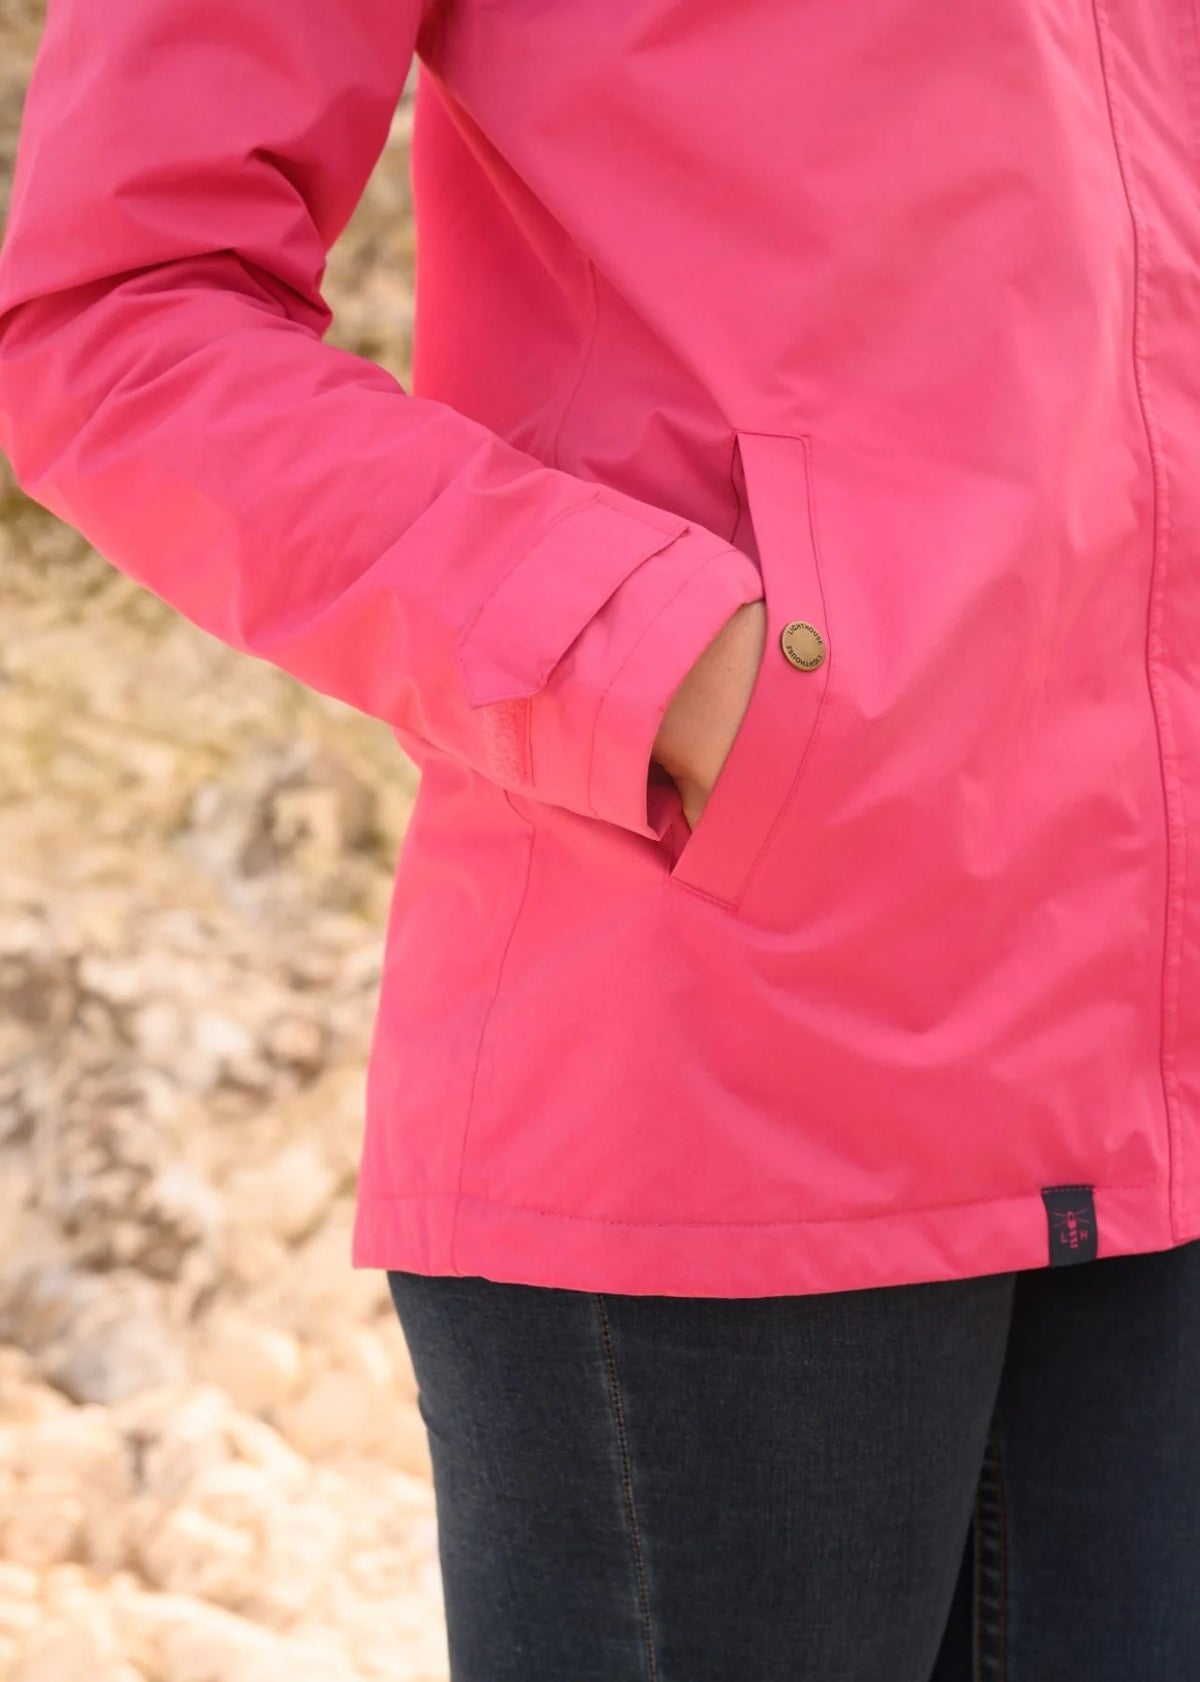 Lighthouse women's Beachcomber waterproof jacket in Pink with popper pockets.